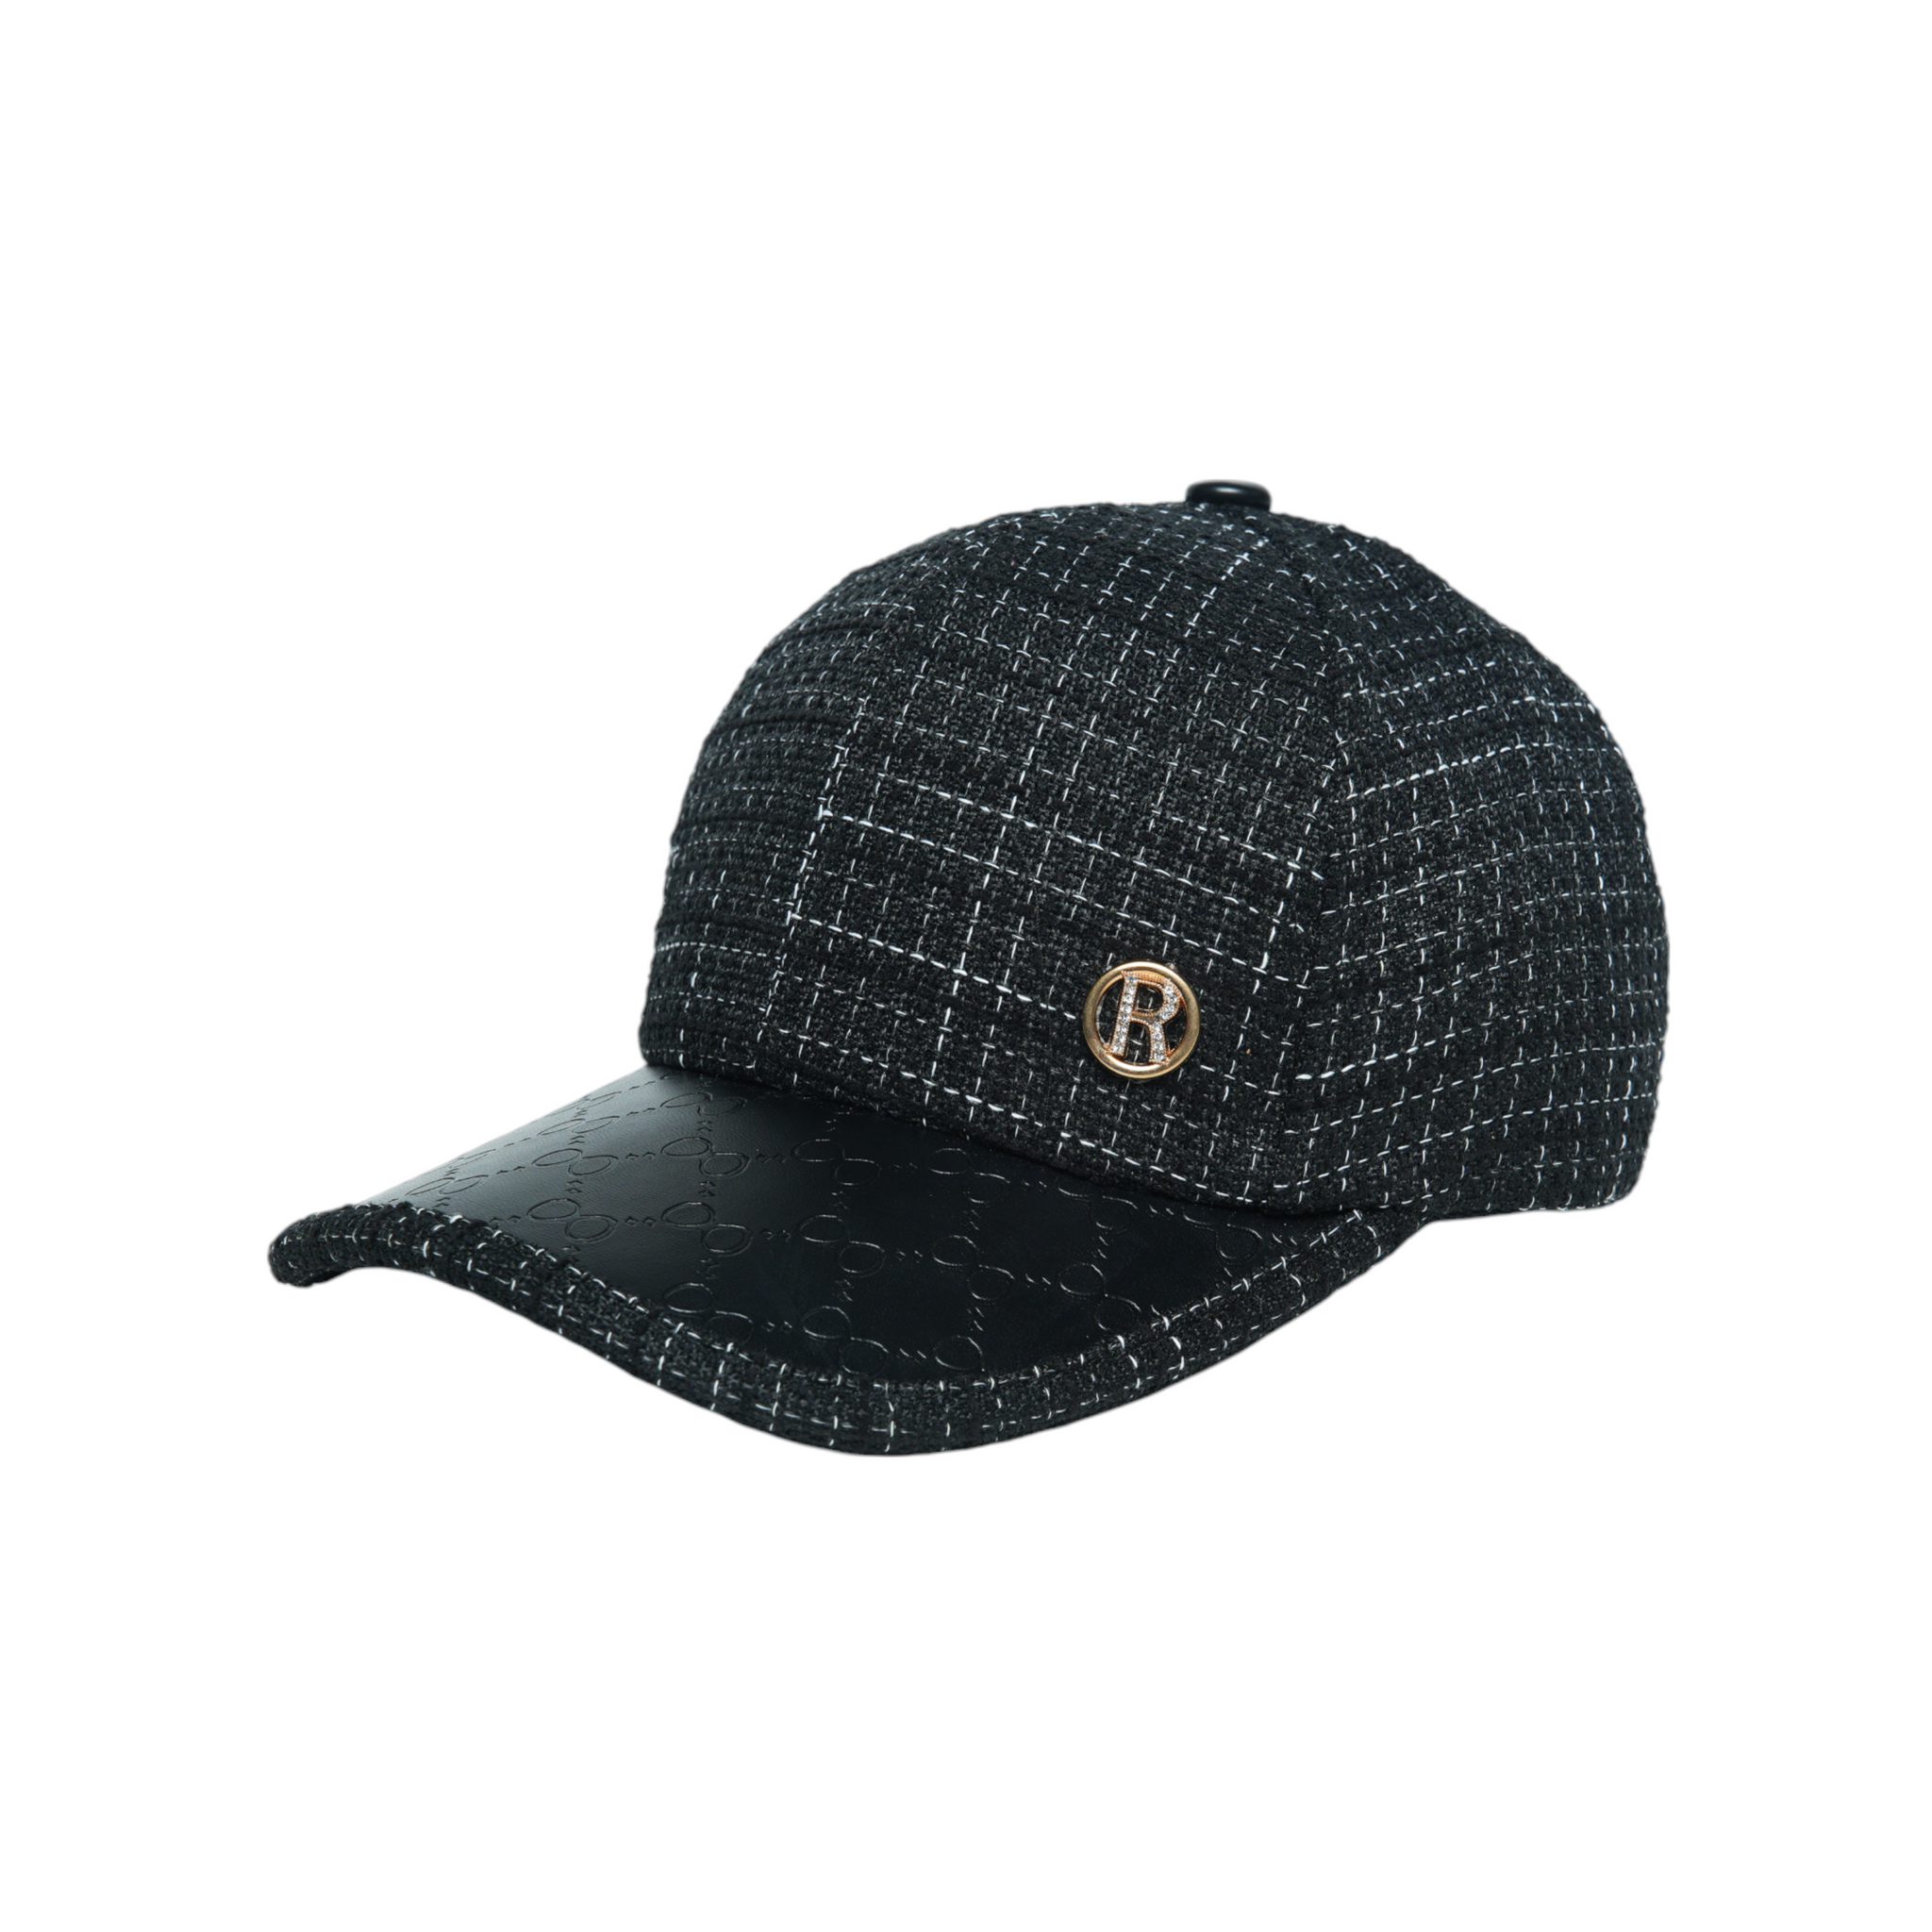 Chokore Retro Houndstooth Pattern Baseball Cap with Leather Details (Black)